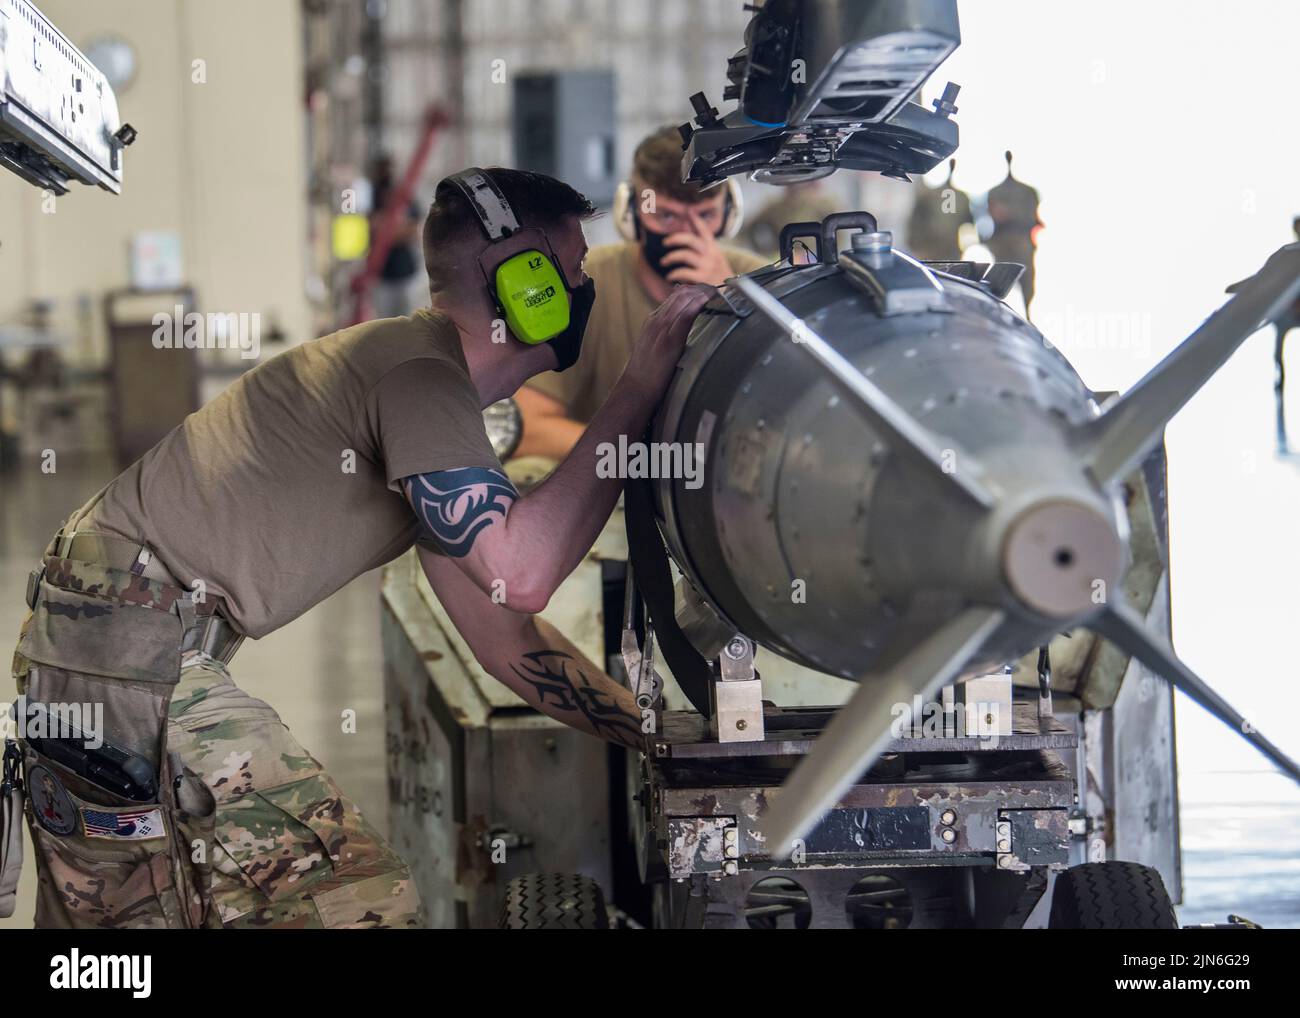 U.S. Air Force Staff Sgt. Kevin Myers, 14th Aircraft Maintenance Unit (AMU) weapons load team chief, secures a training GBU-31, a guided bomb, to the weapons sub-assembly on an F-16 Fighting Falcon during the second quarter load competition at Misawa Air Base, Japan, July 16, 2021. Load crews from the 13th and 14th AMU take part in this competition, ensuring readiness and proper munitions handling in a timely manner. (U.S. Air Force photo by Airman 1st Class Leon Redfern) Stock Photo